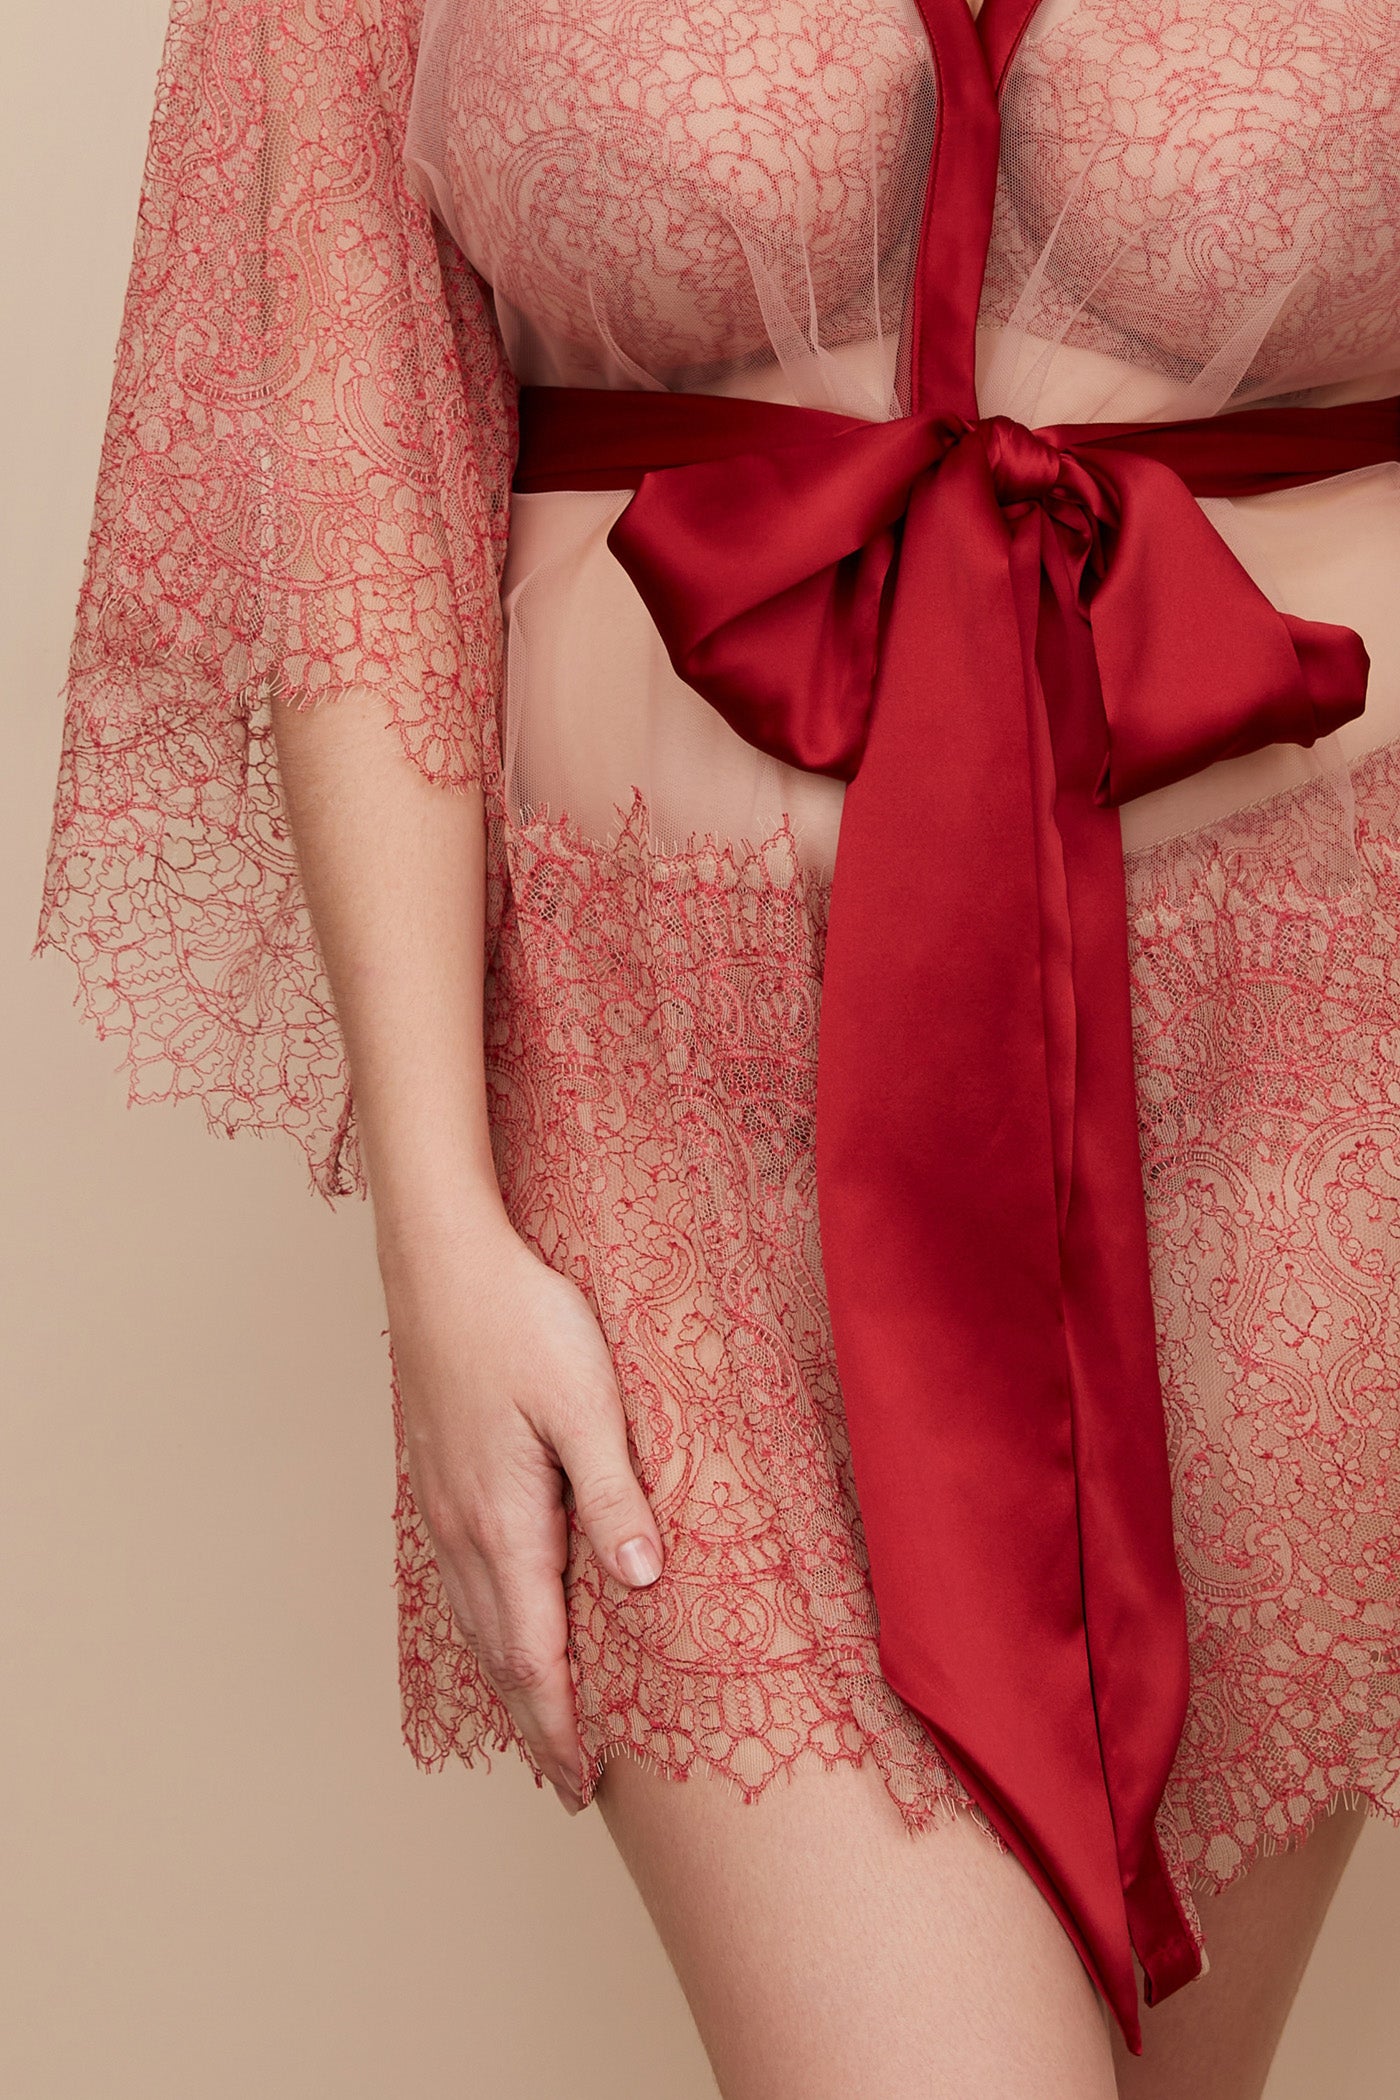 Closeup of red silk sash tied in bow and deep bands of fine french lace on robe